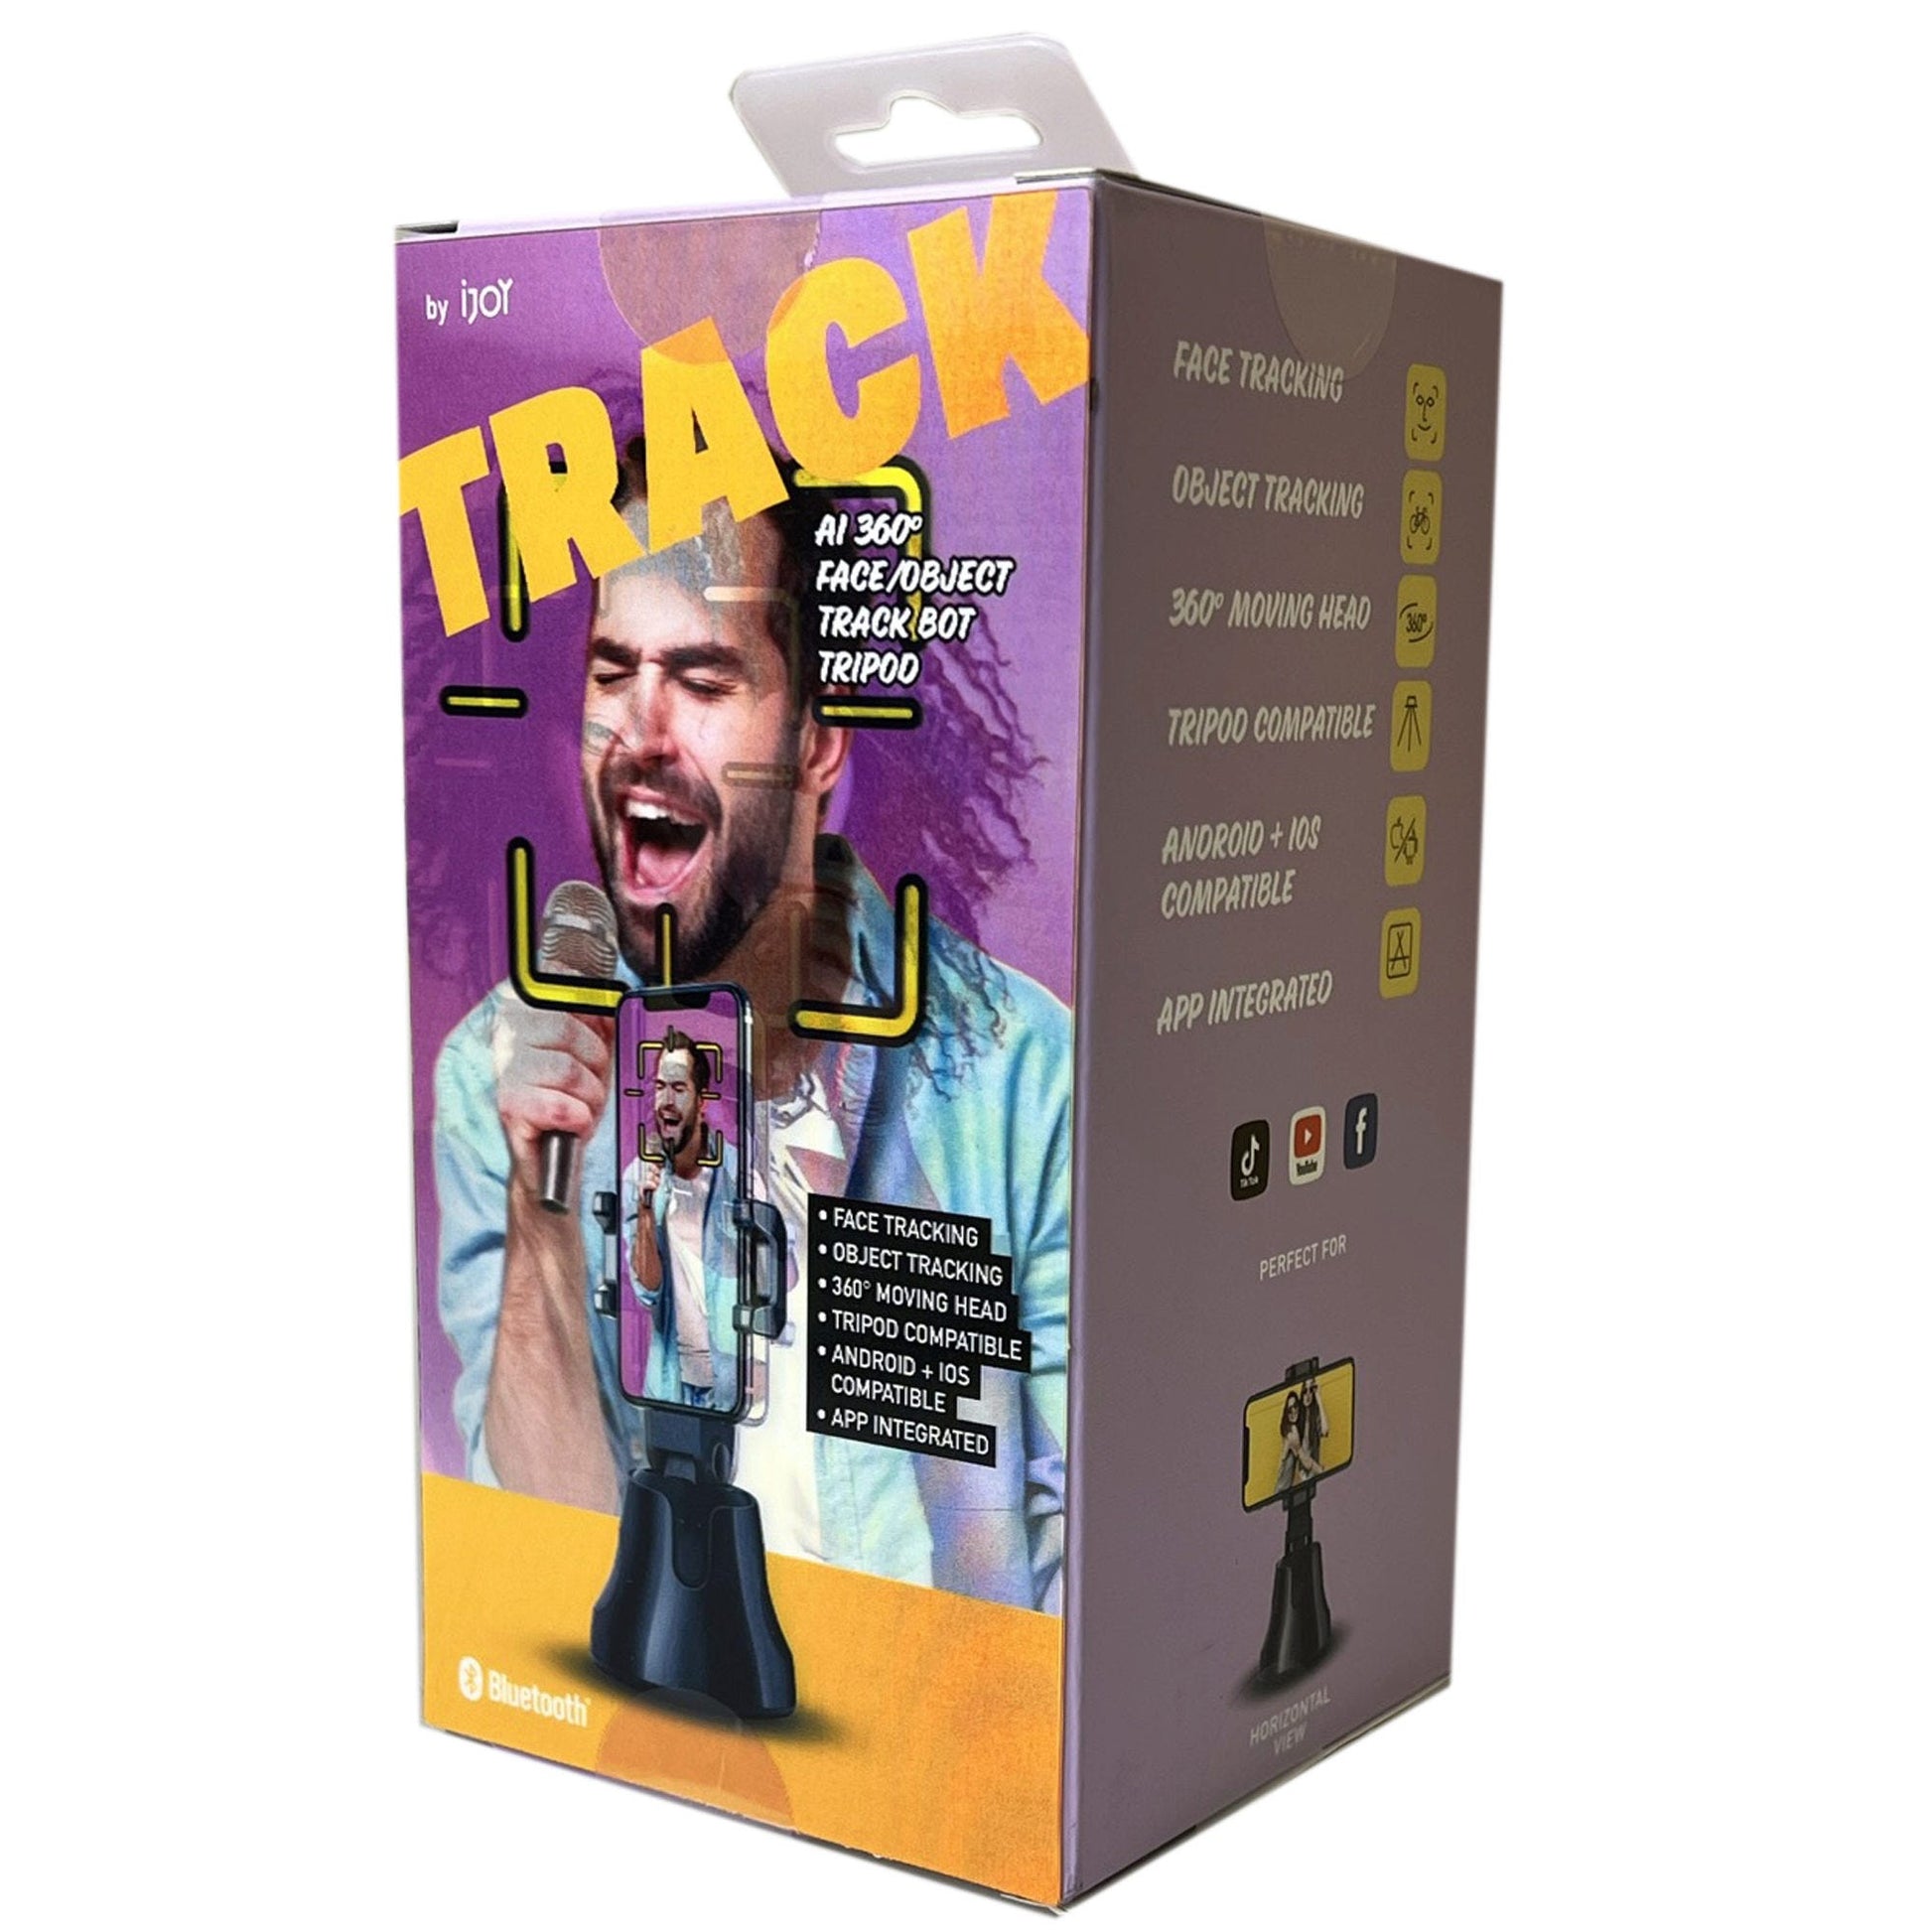 ijoy track a.i. smart 360 motion face tracking tripod - 24 pack -- 6 per box